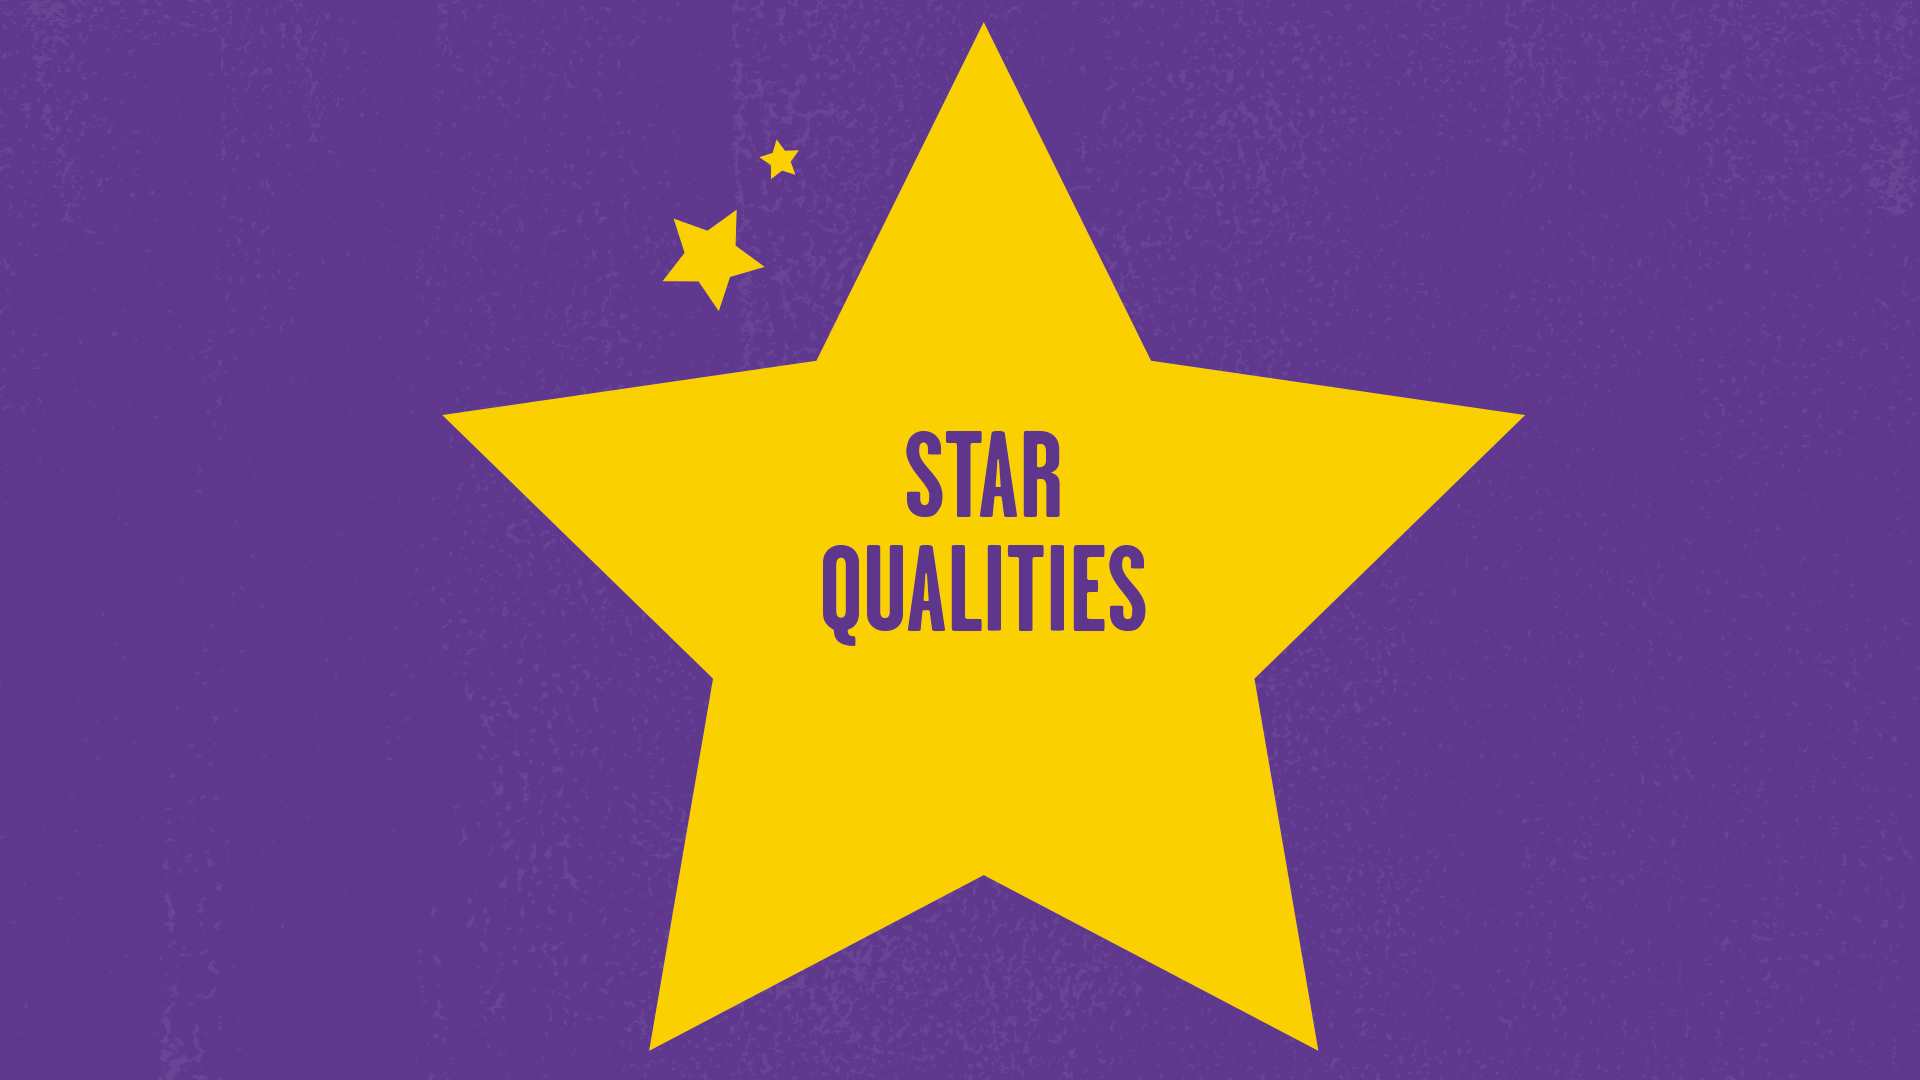 A yellow star on a purple background. Inside the star it says 'Star Qualities'.